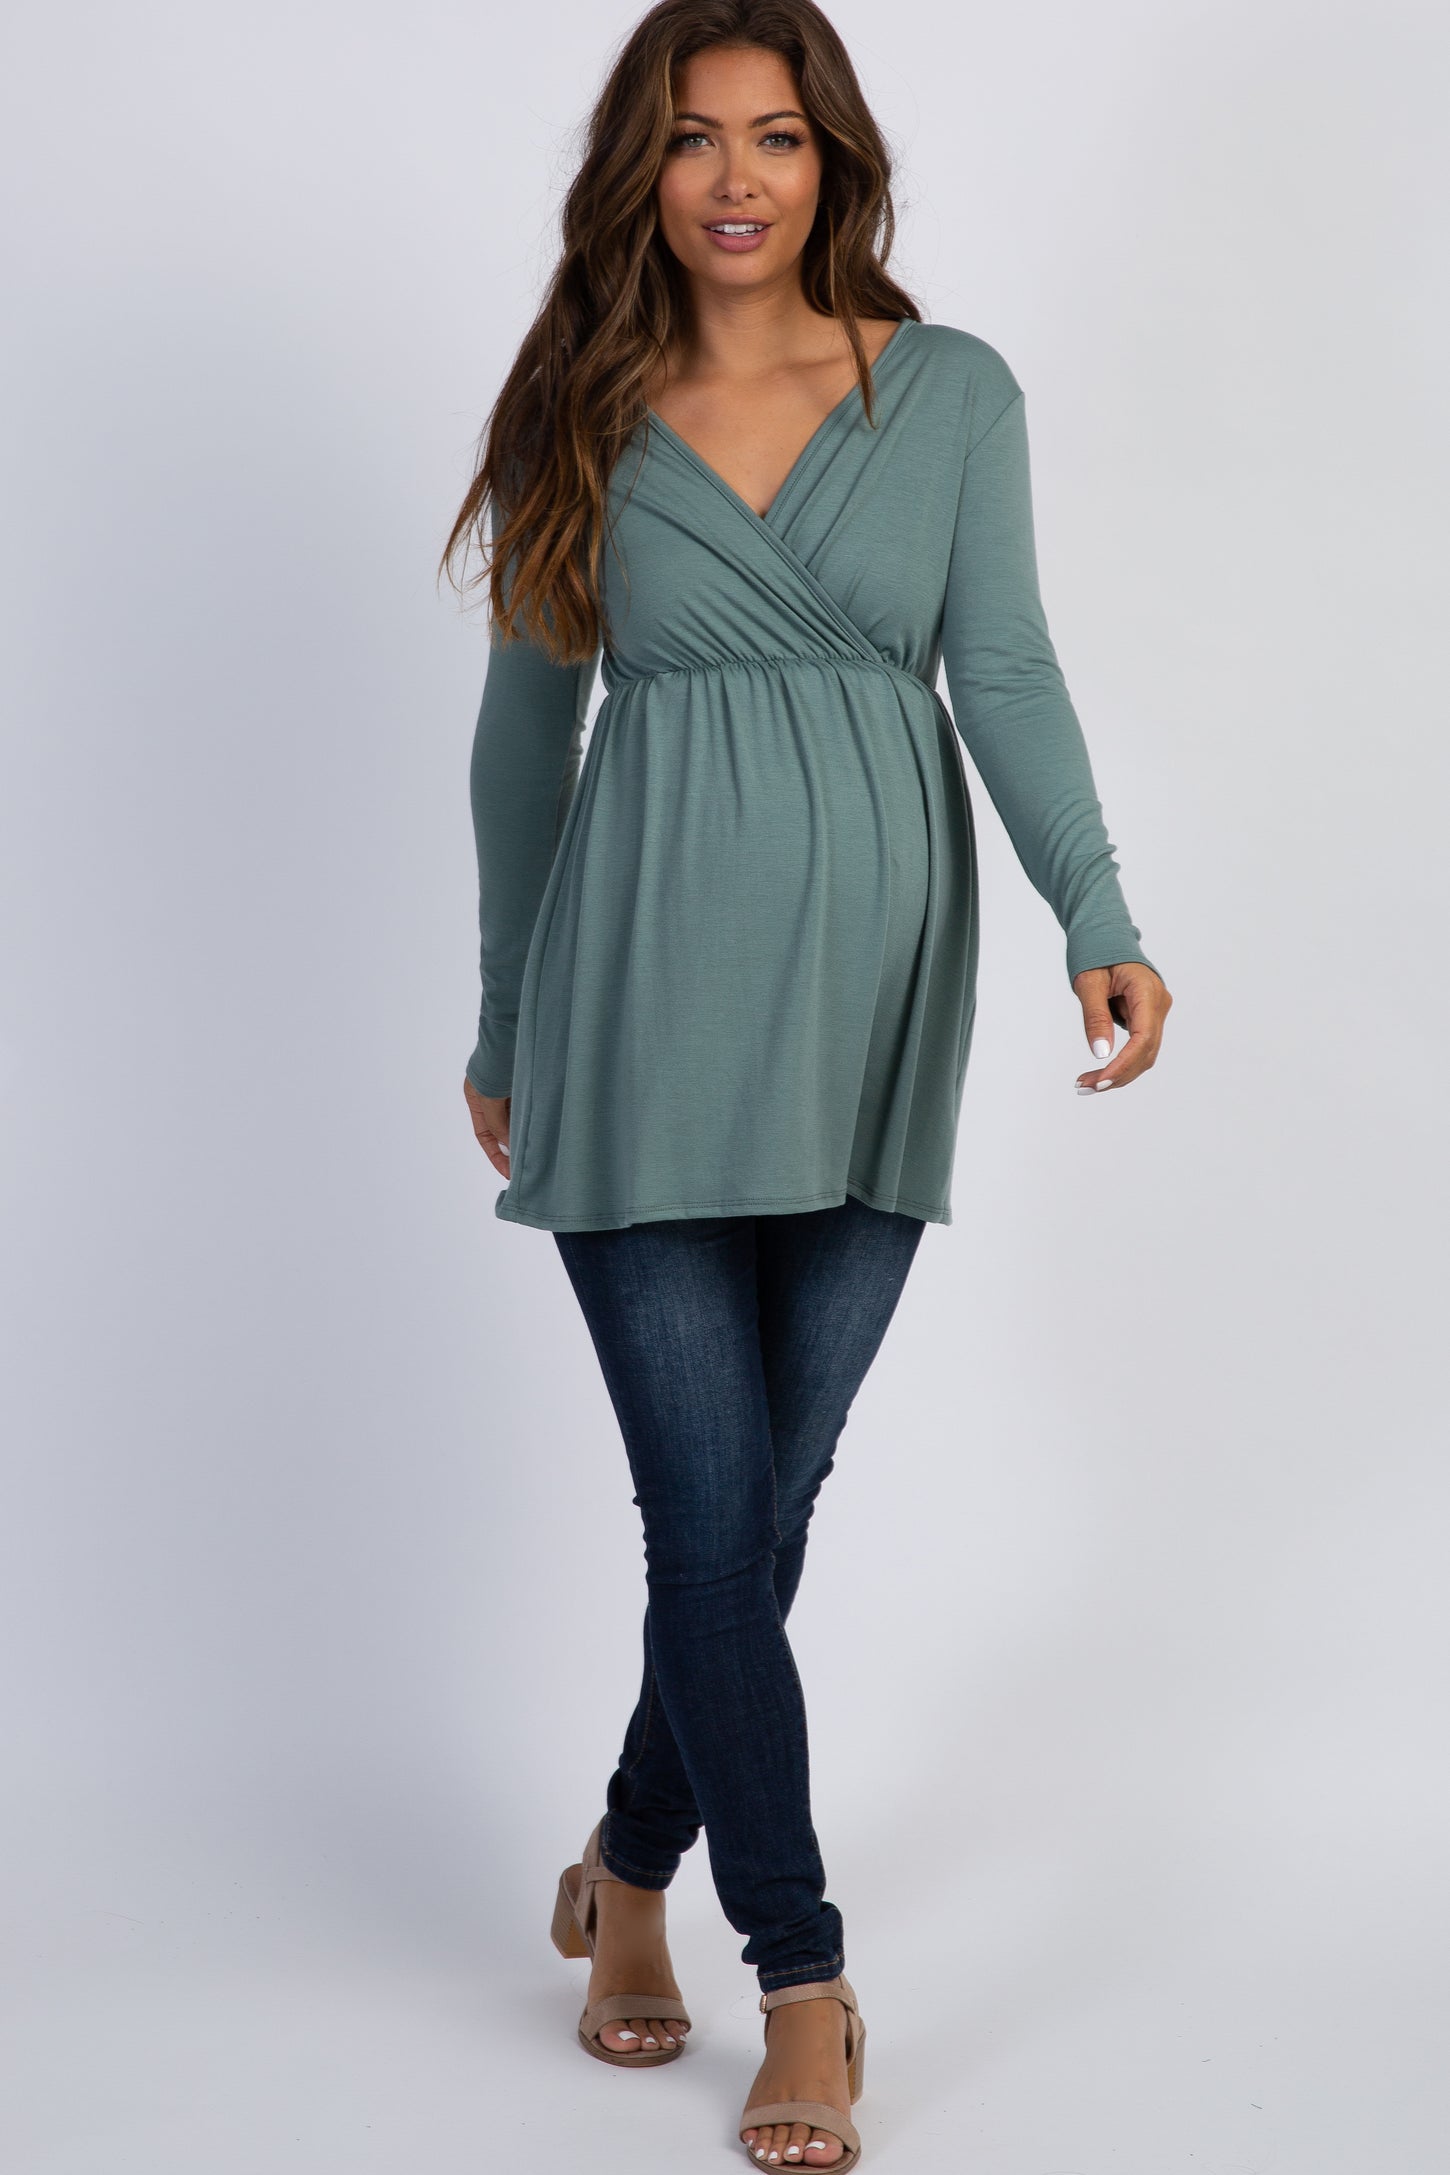 PinkBlush Olive Green Long Sleeve Wrap Front Maternity Nursing Top